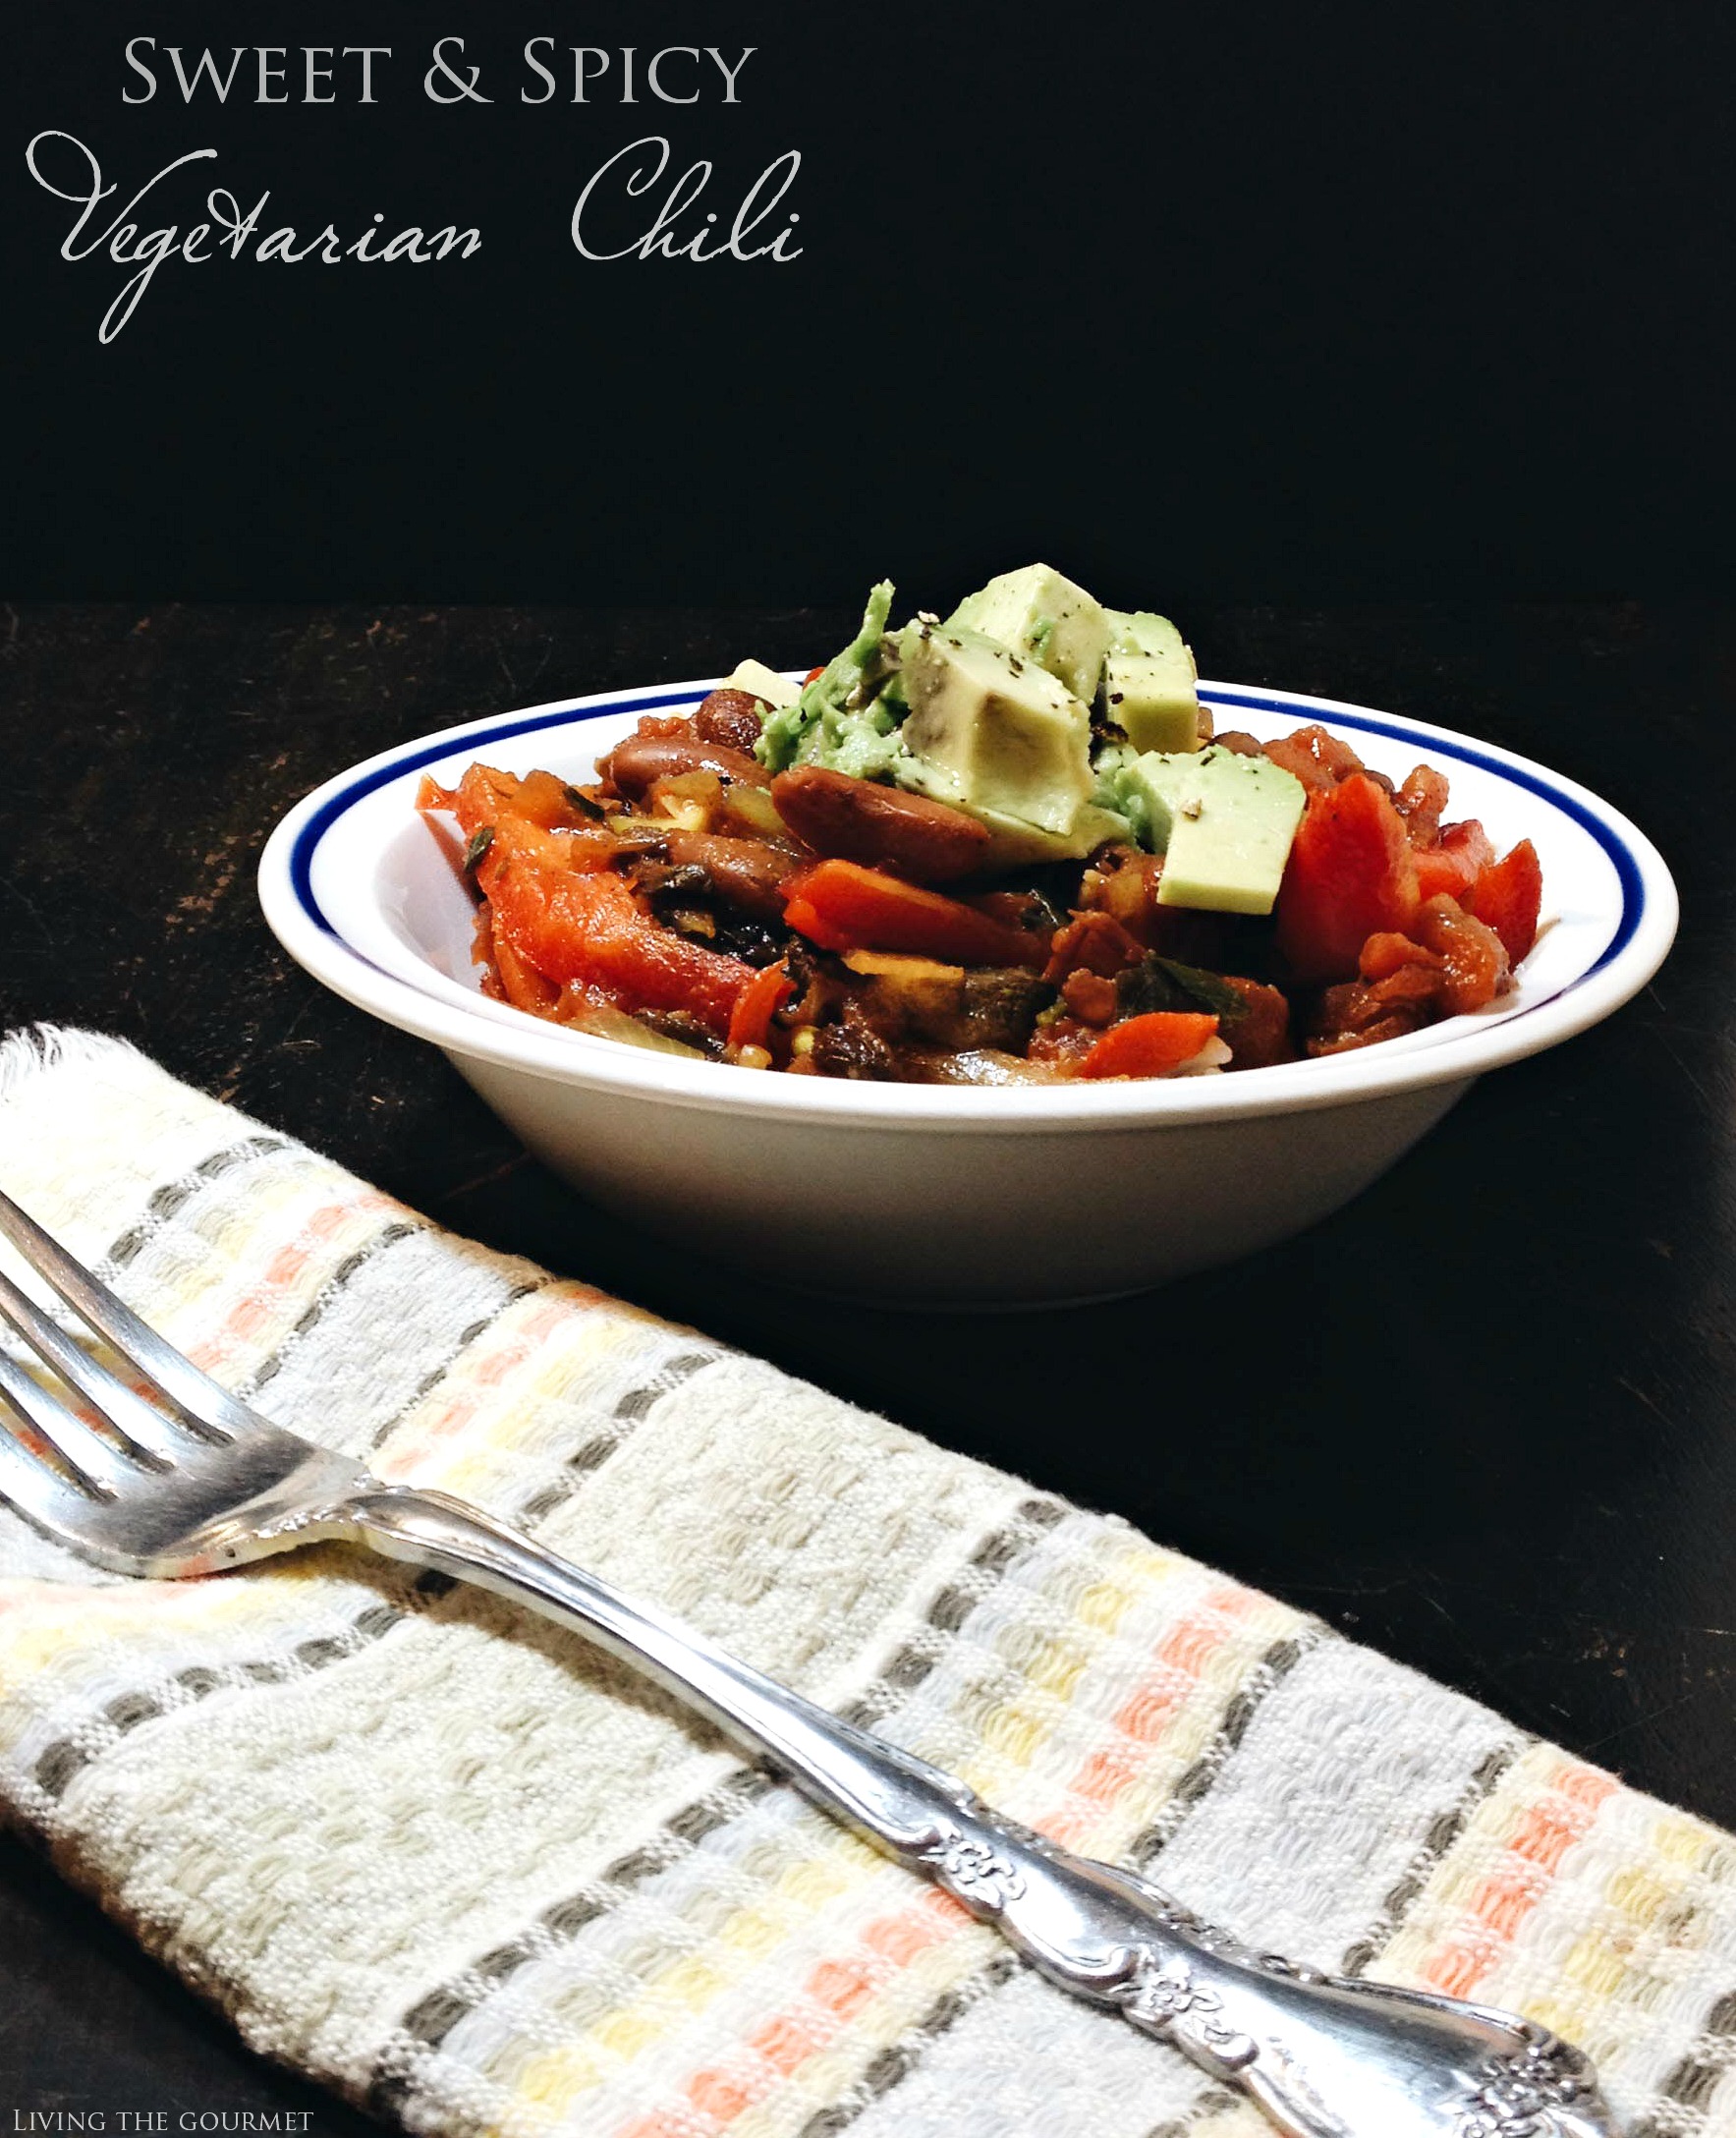 Living the Gourmet: Sweet and Spicy Vegetarian Chili